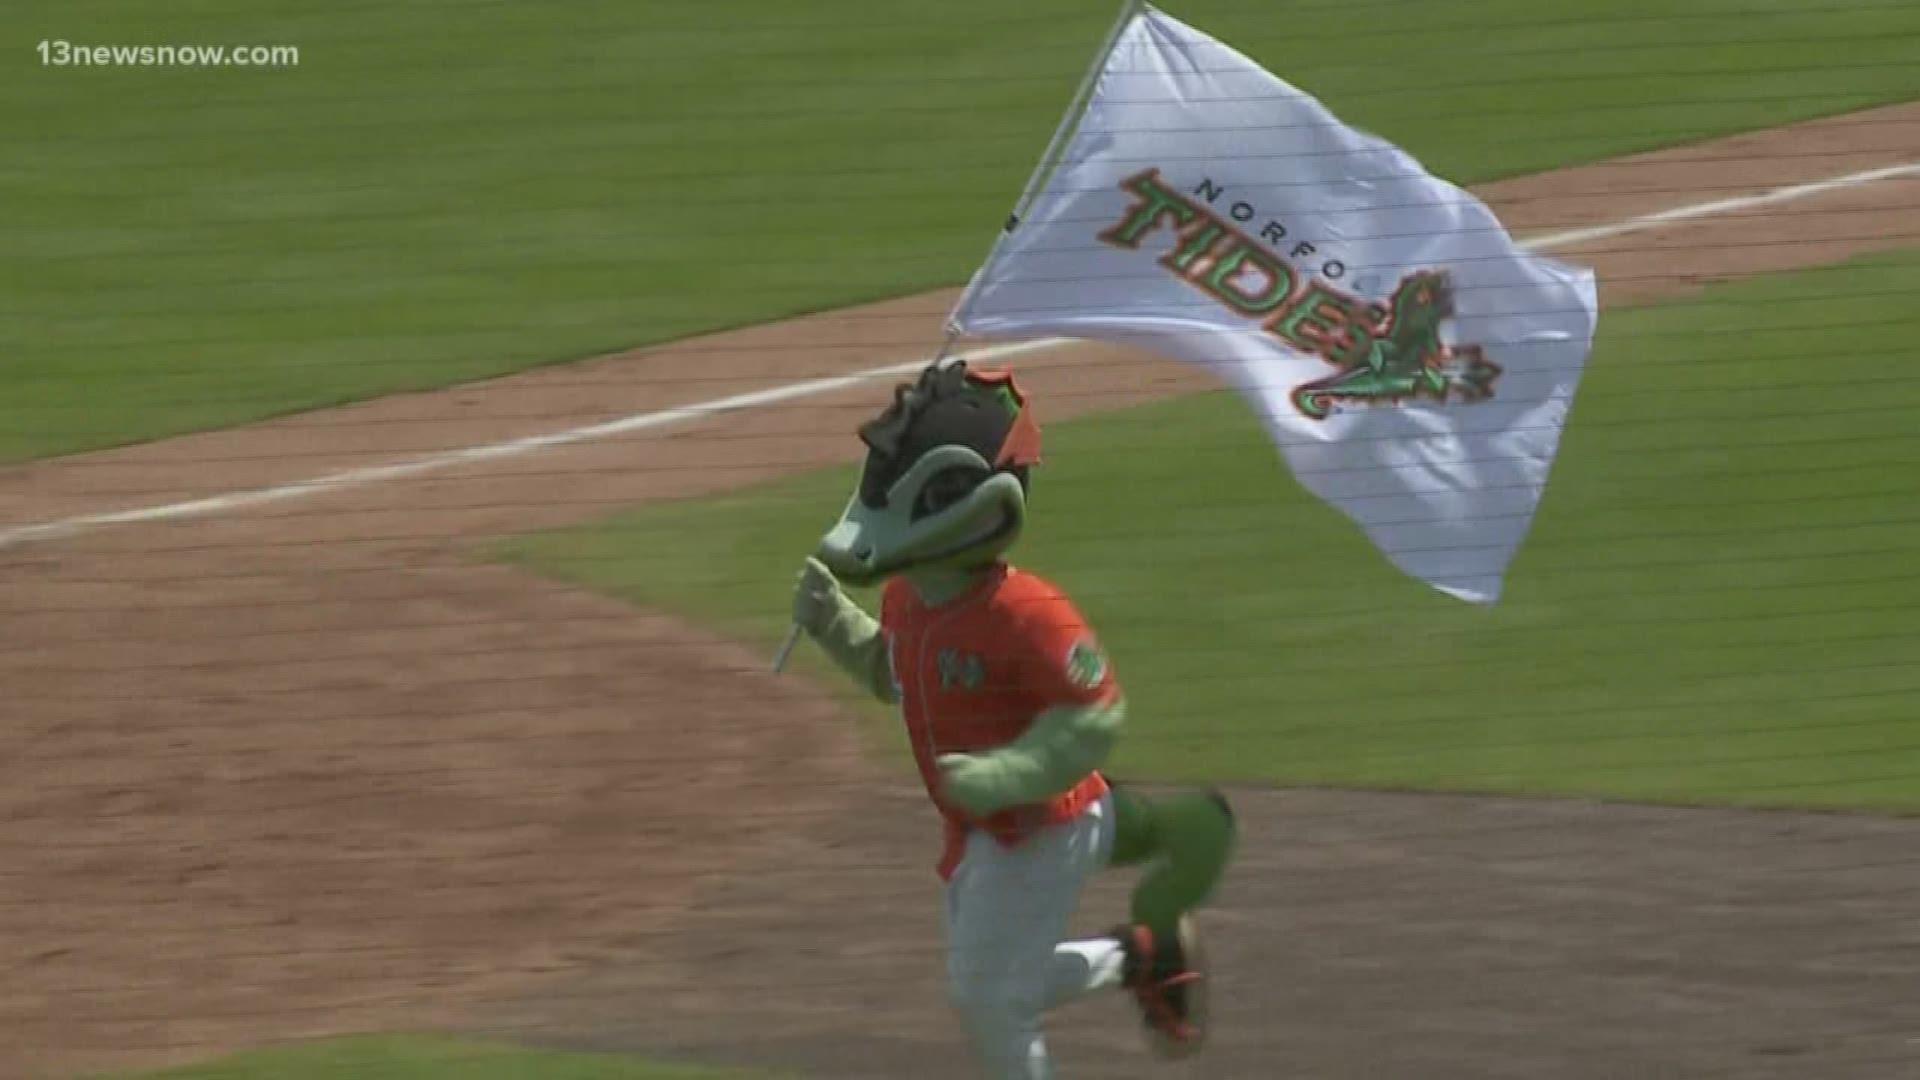 The Norfolk Tides rallied from five runs down to take a lead, but lost in 10 innings, 9-6.